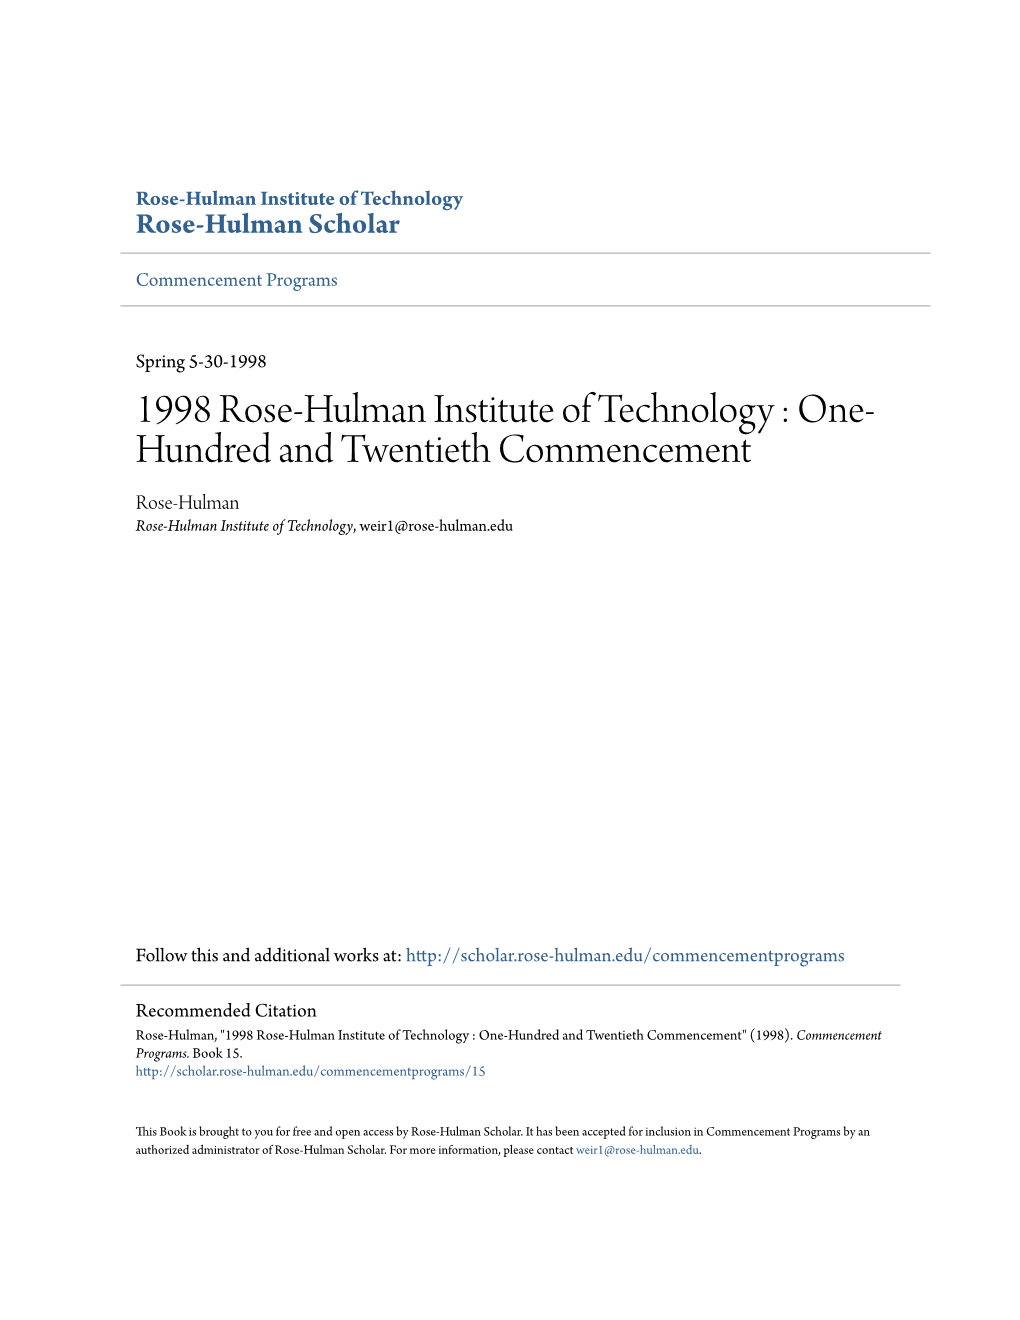 One-Hundred and Twentieth Commencement" (1998)